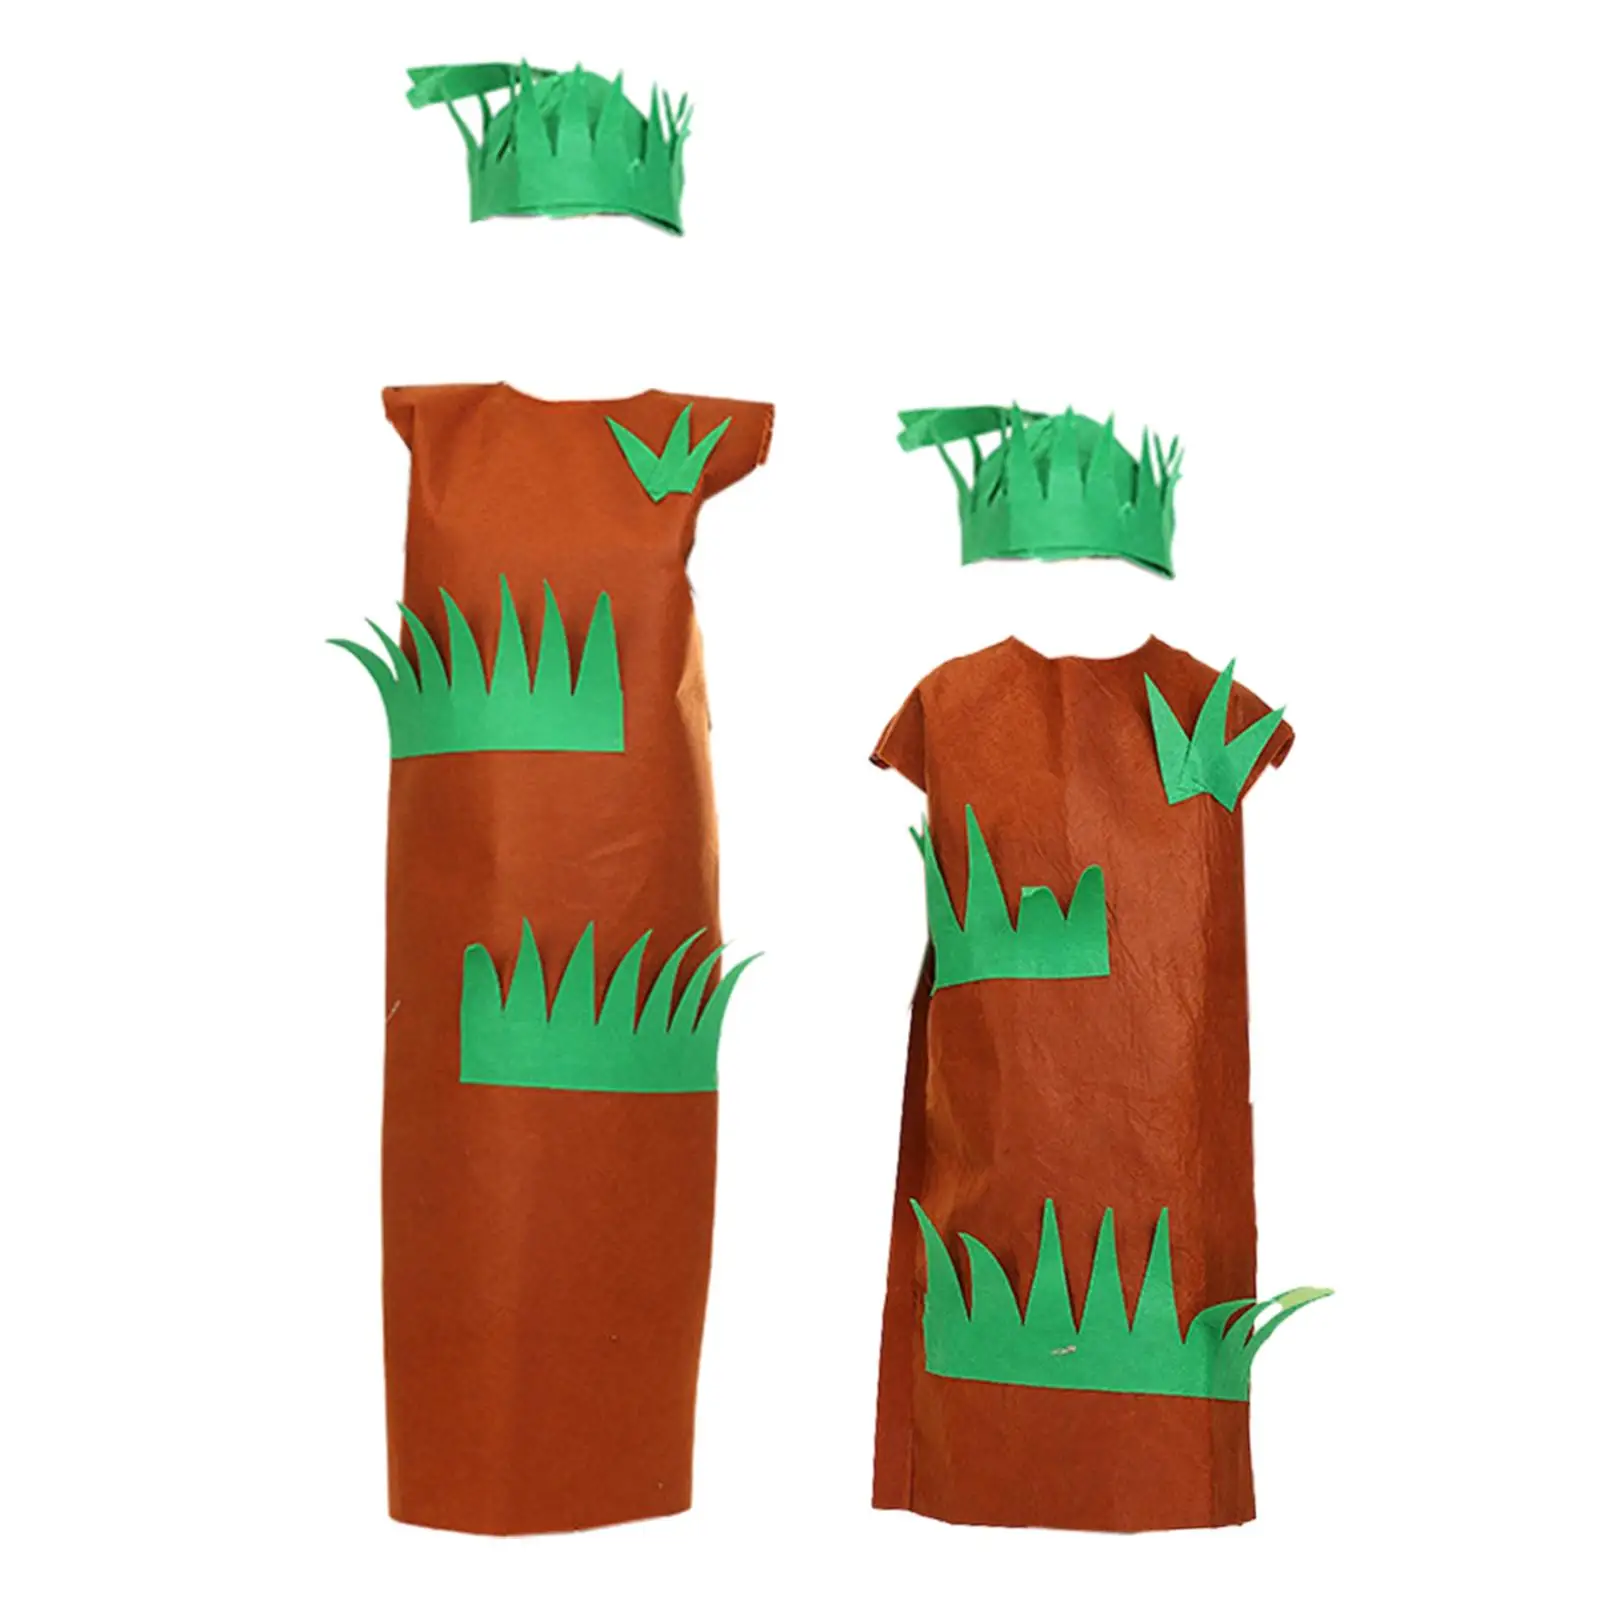 Grass Cosplay Costume Headdress Accessories Halloween Suit Dress for Themed Party Role Play Carnivals Holidays Stage Performance